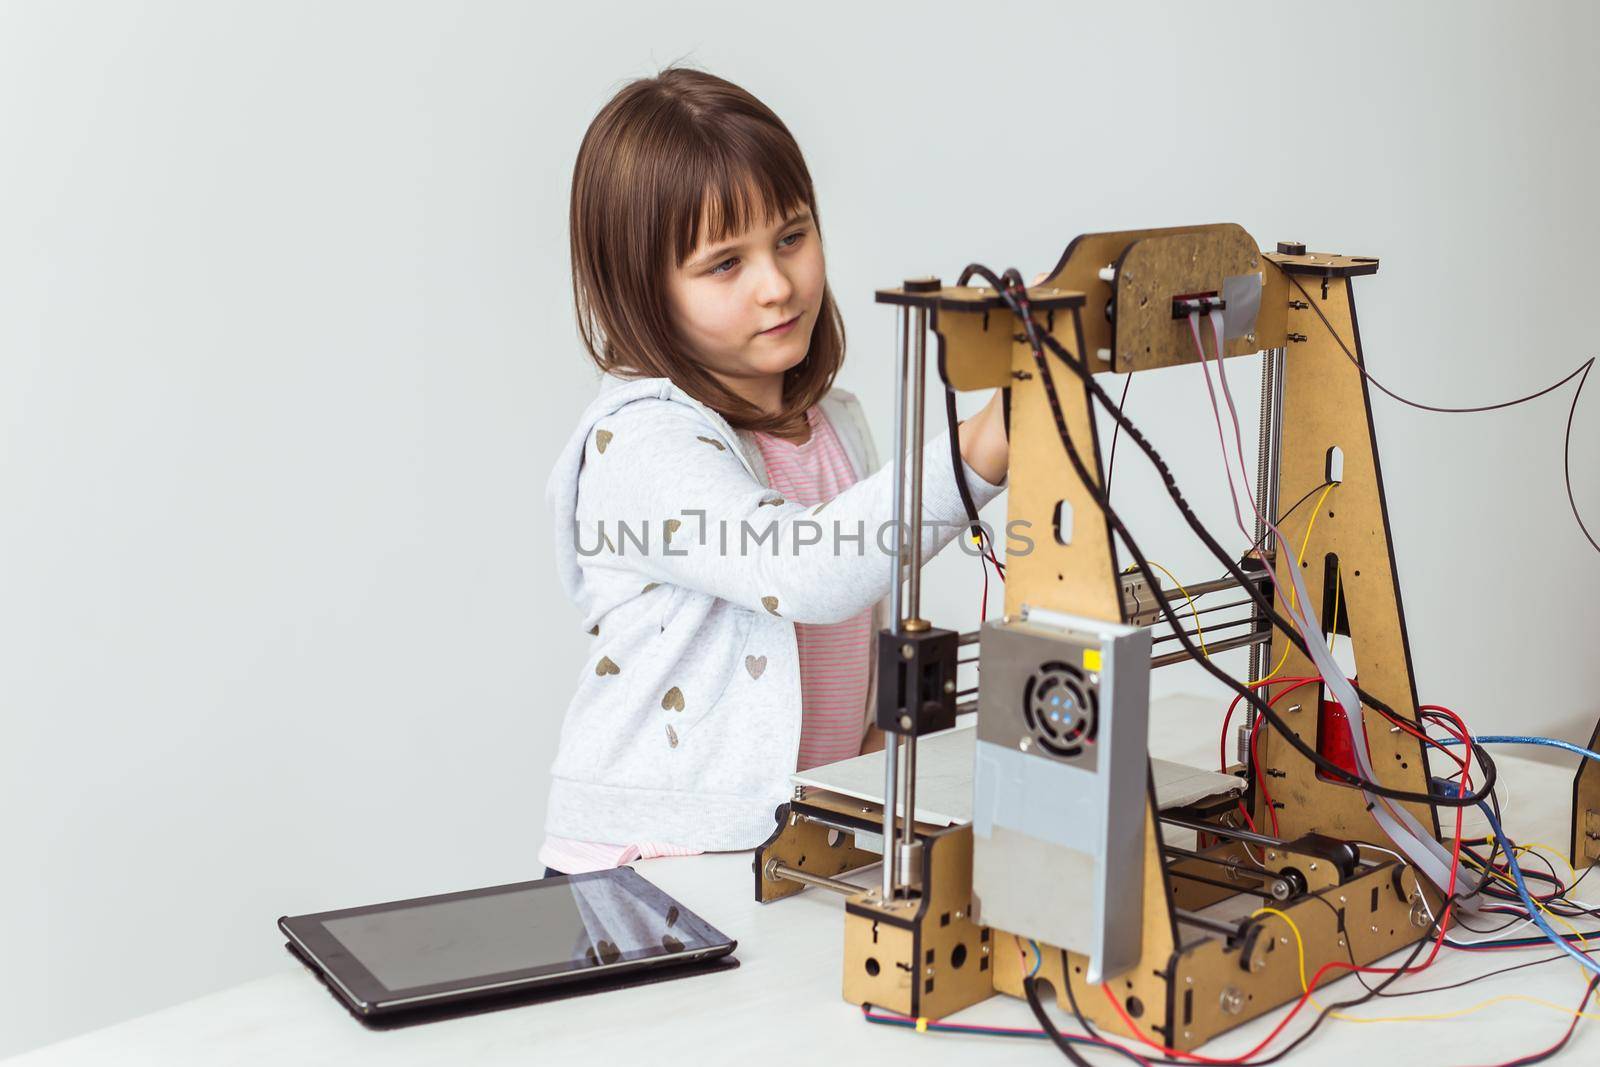 Child student makes the item on the 3D printer. School, technologies and science concept. by Satura86